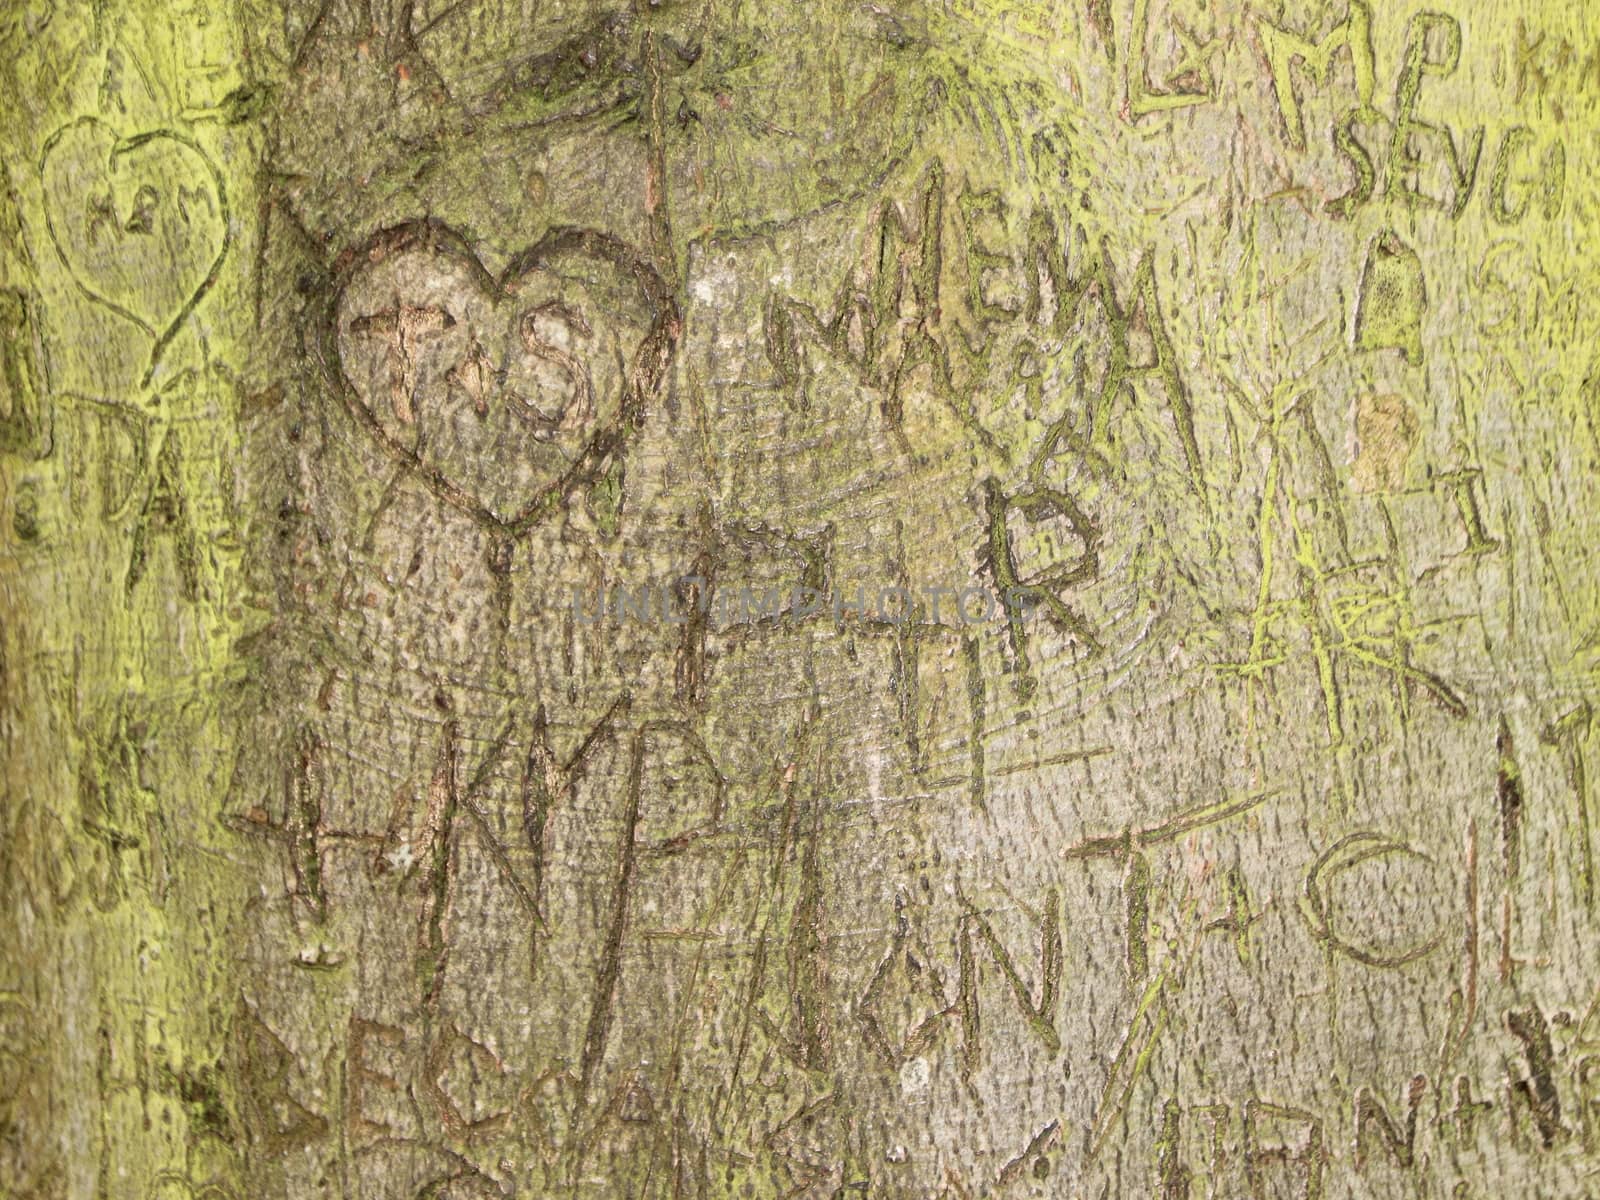 Initials Memory Carving in Green Bark on Old Tree by HoleInTheBox